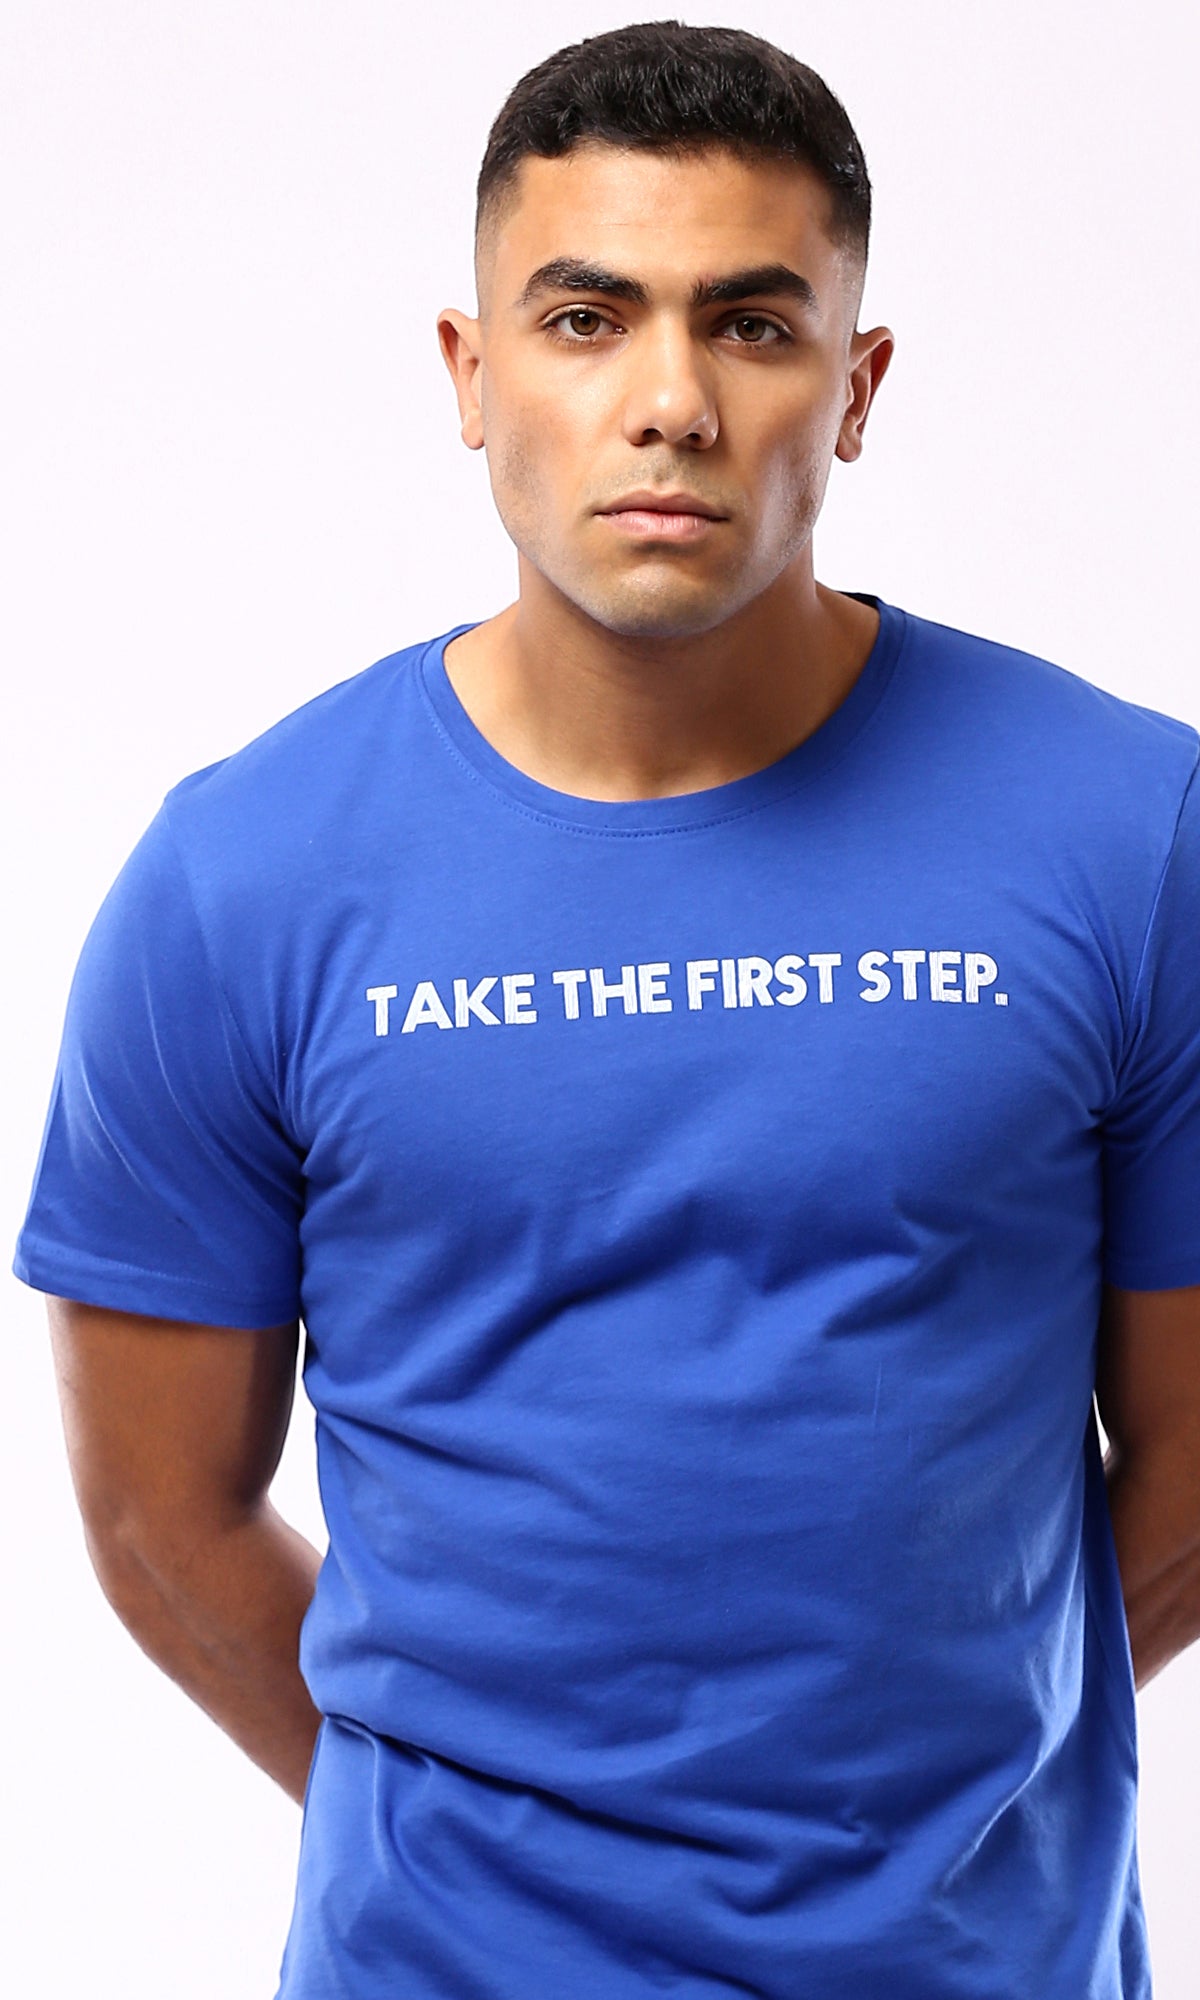 O179020 "Take The First Step" Blue Cotton Summer Tee